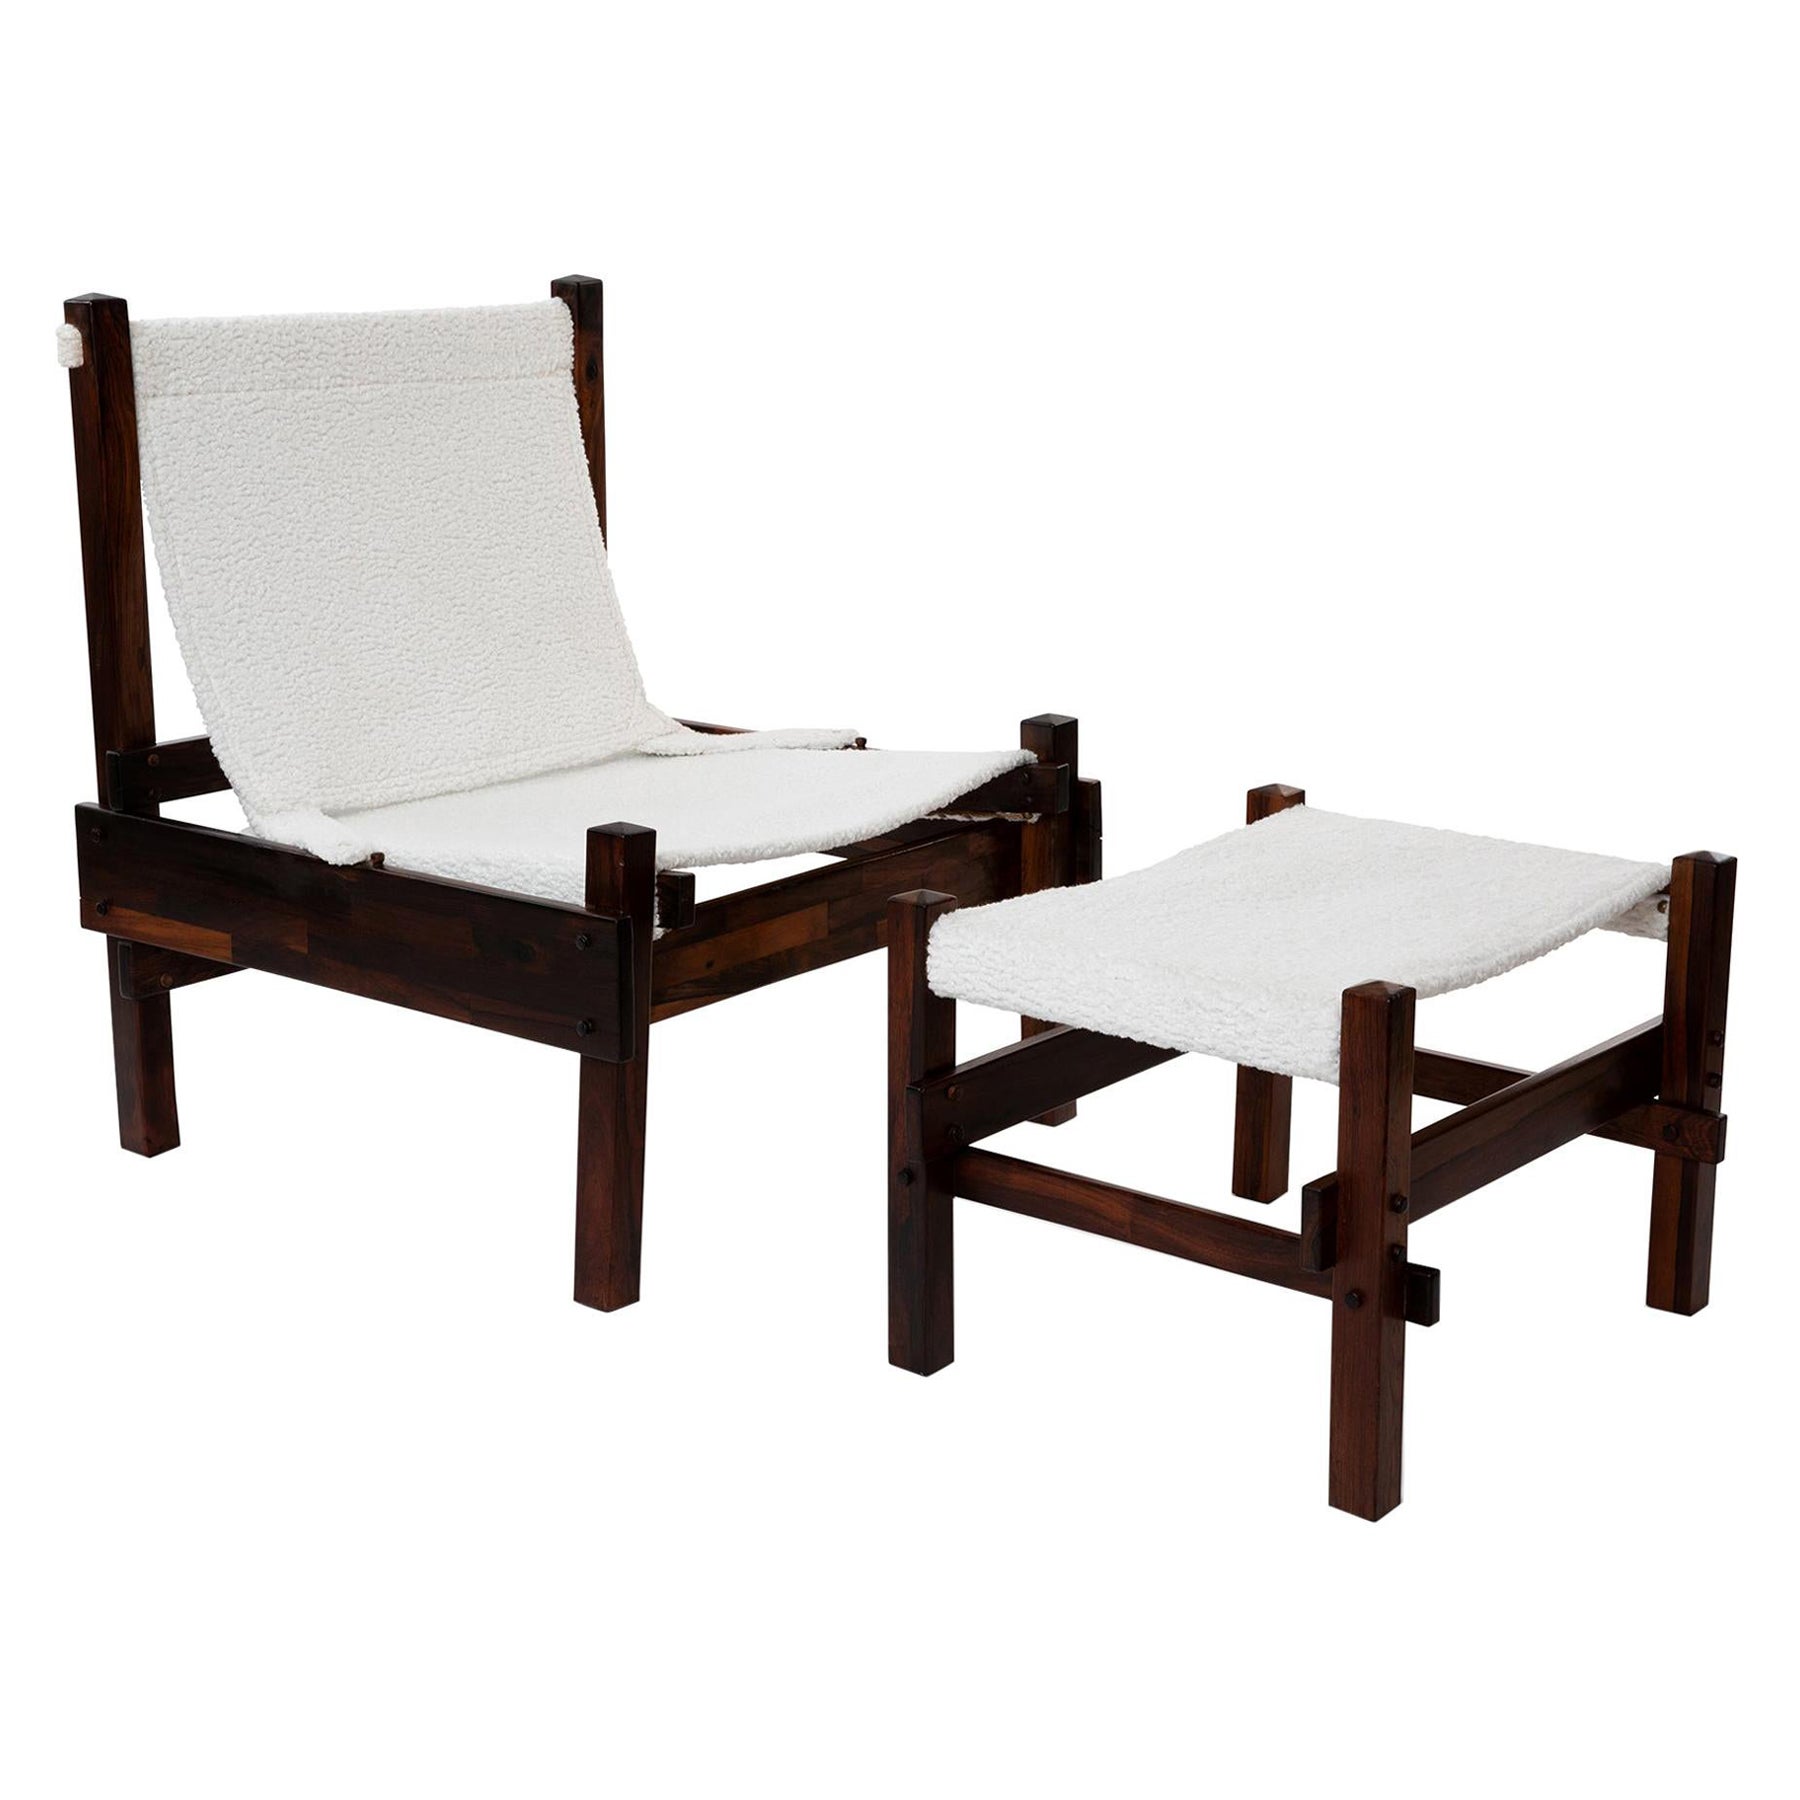 Brazilian Rosewood Sling Chair & Ottoman, 1960s For Sale